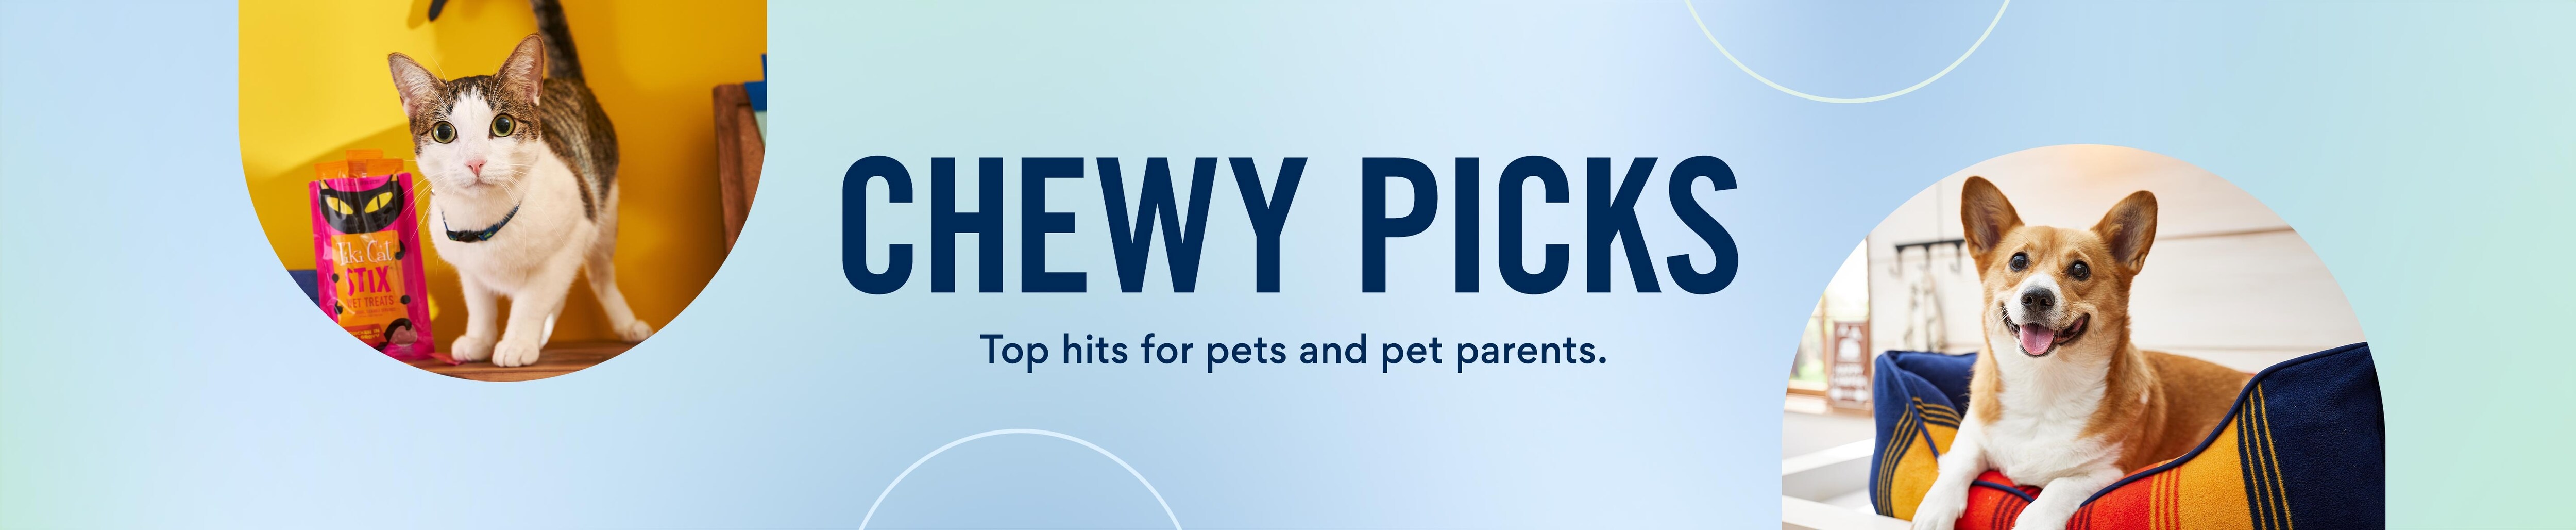 chewy picks. top hits for pets and pet parents